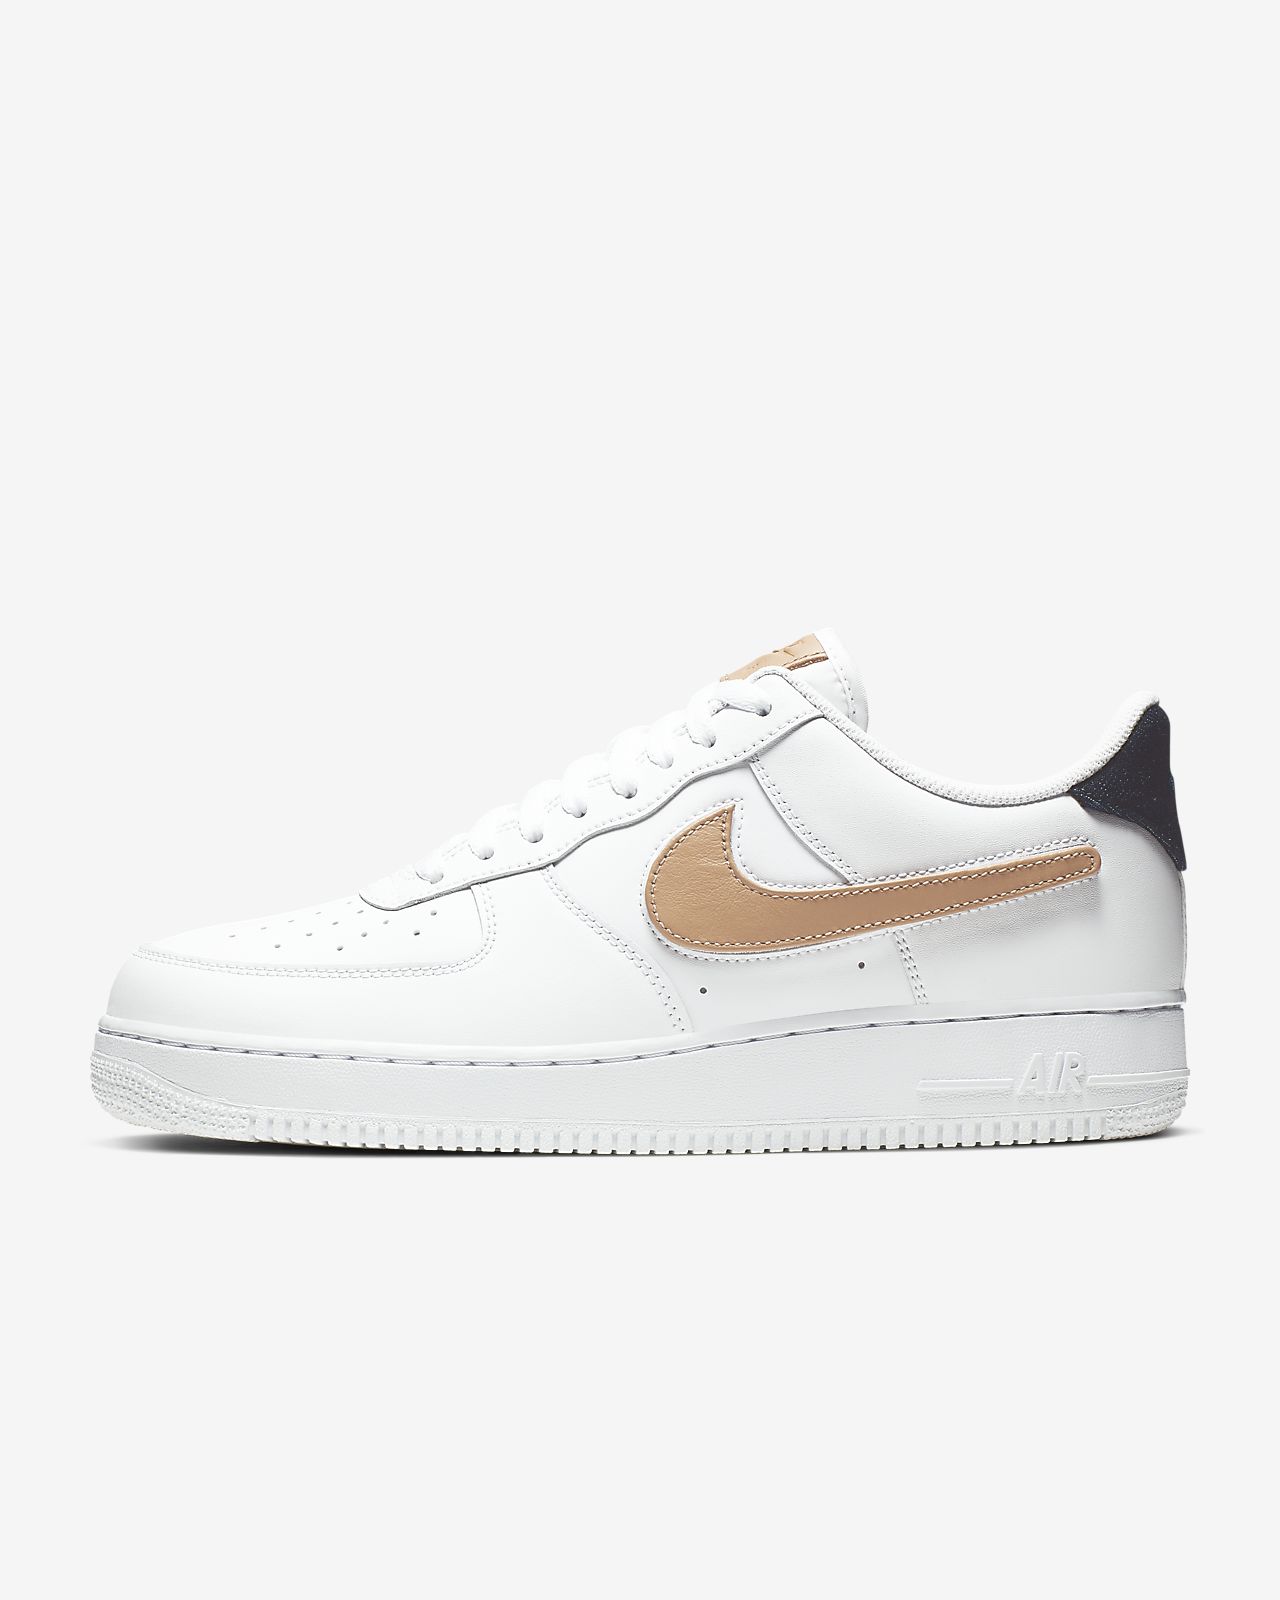 nike air force 1 07 3 hombre